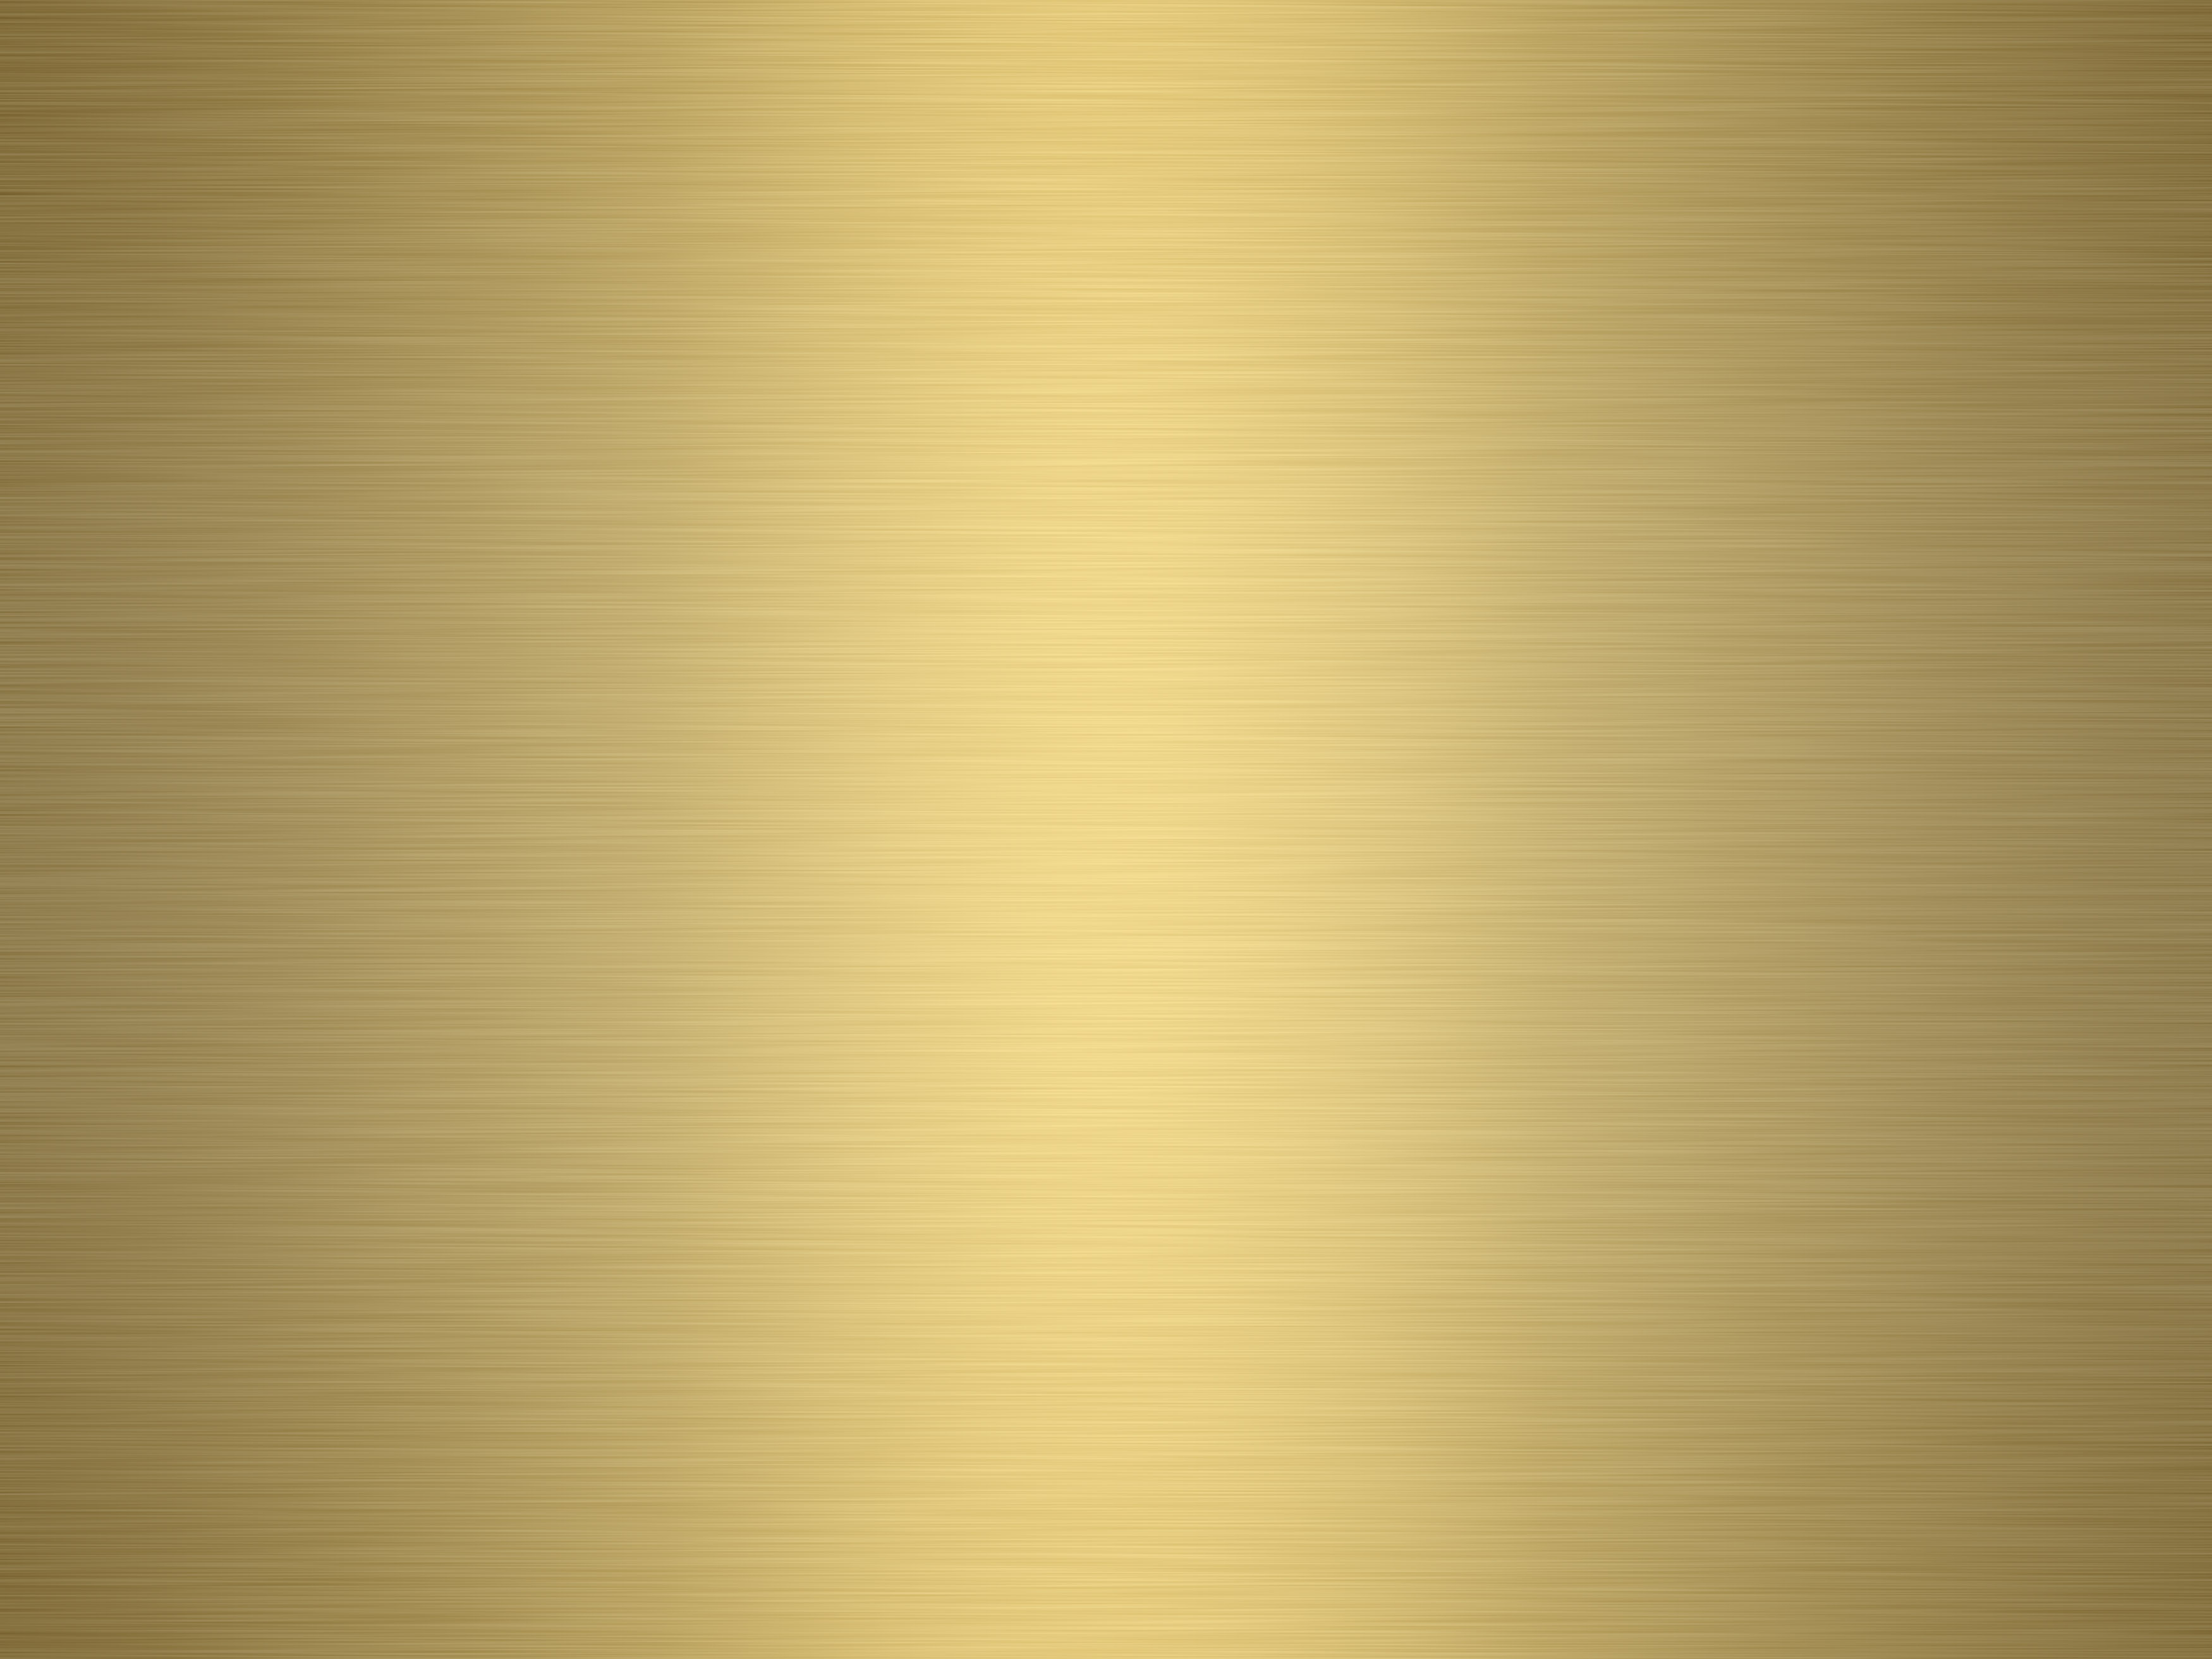 brushed gold metal background texture